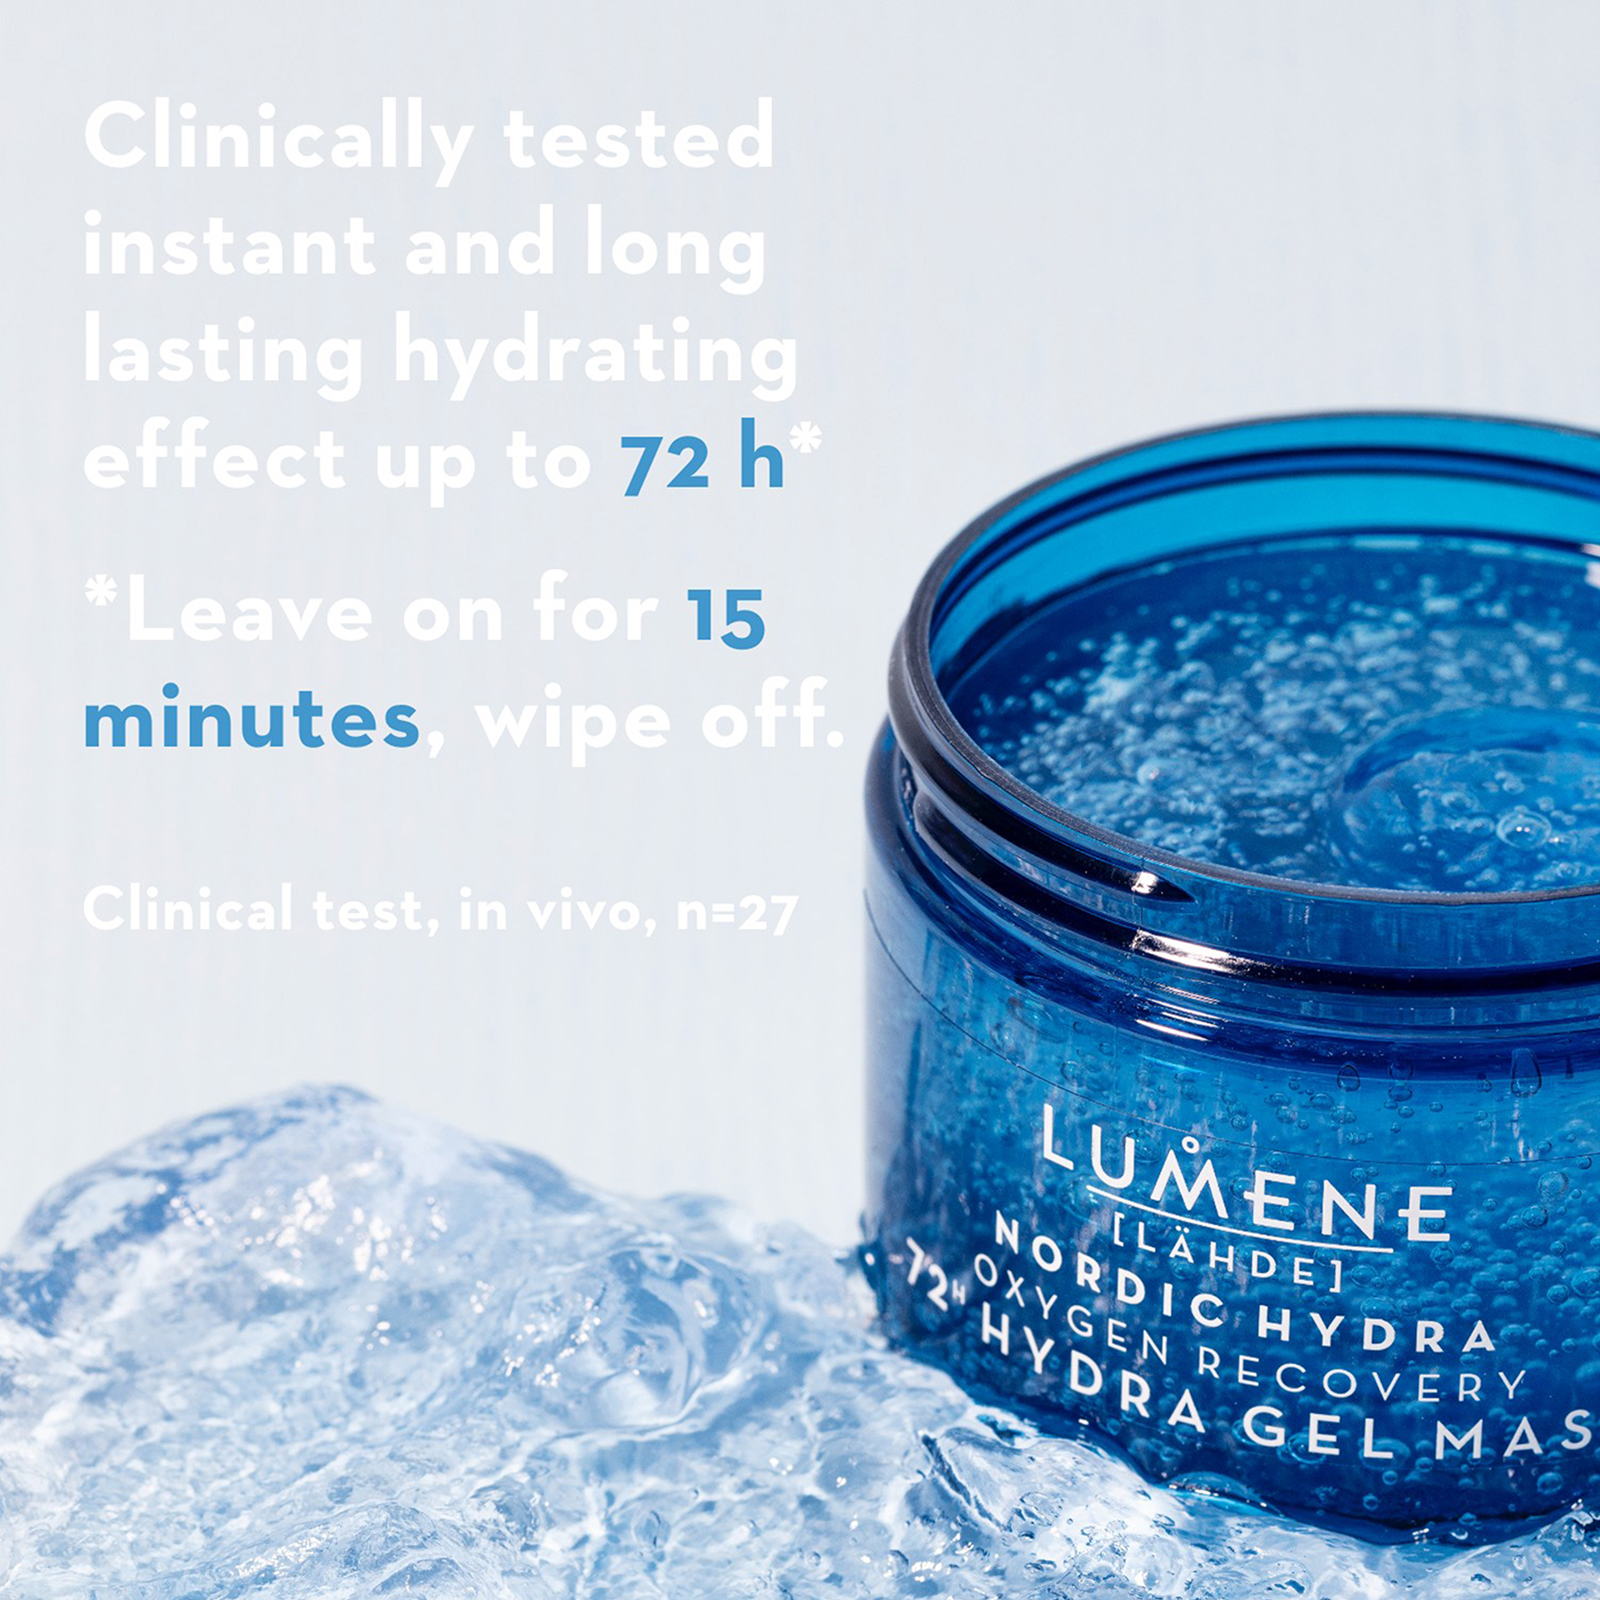 Clinically tested instant and long lasting hydrating effect up to 72 h *Leave on for 15 minutes wipe off. Clinical test, in vivo, n=27